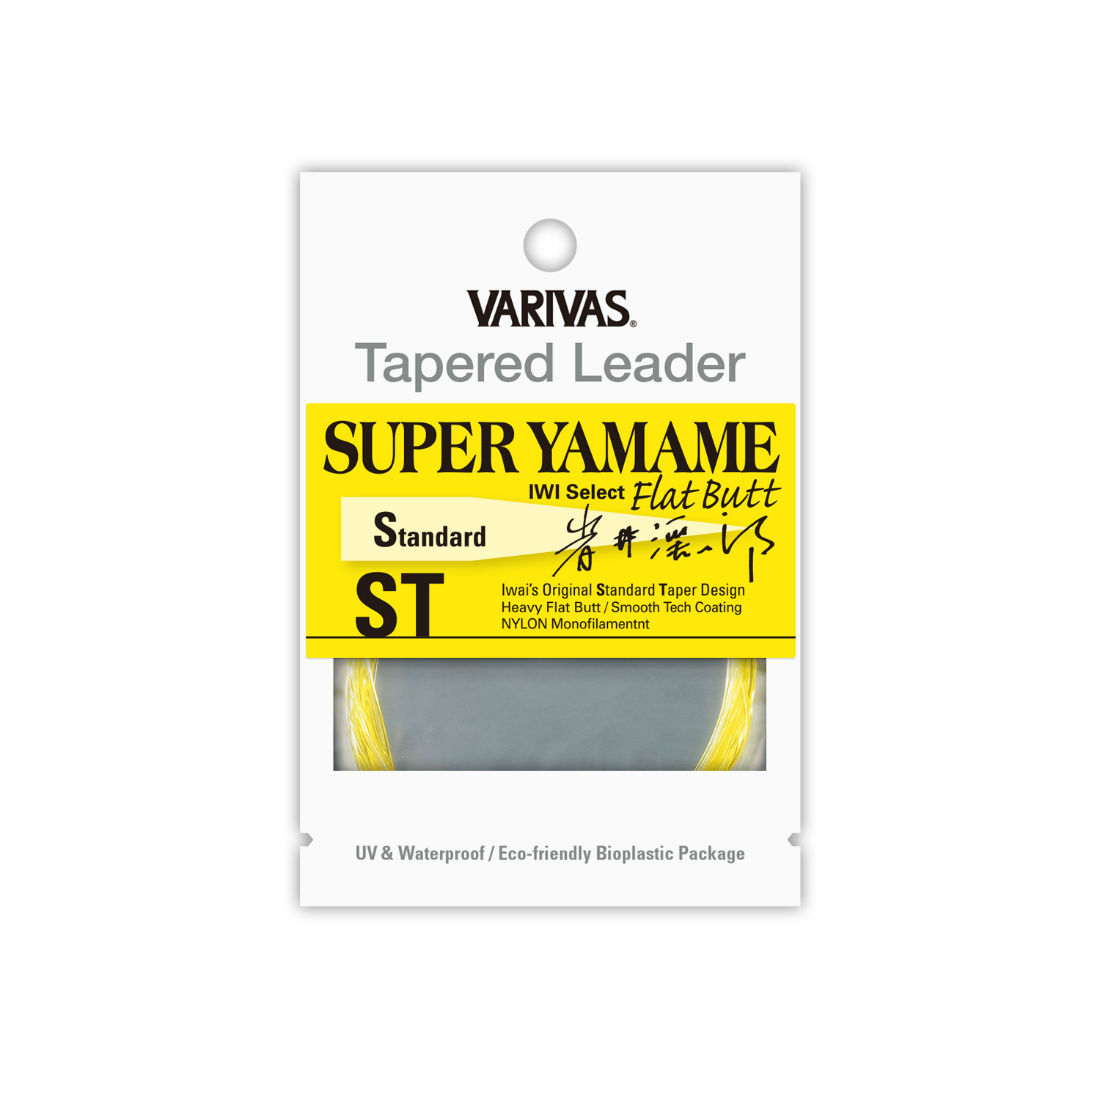 INAINTAS FLY TAPERED LEADER SUPER YAMAME FLAT BUTT ST 15ft 4X Flash Yellow